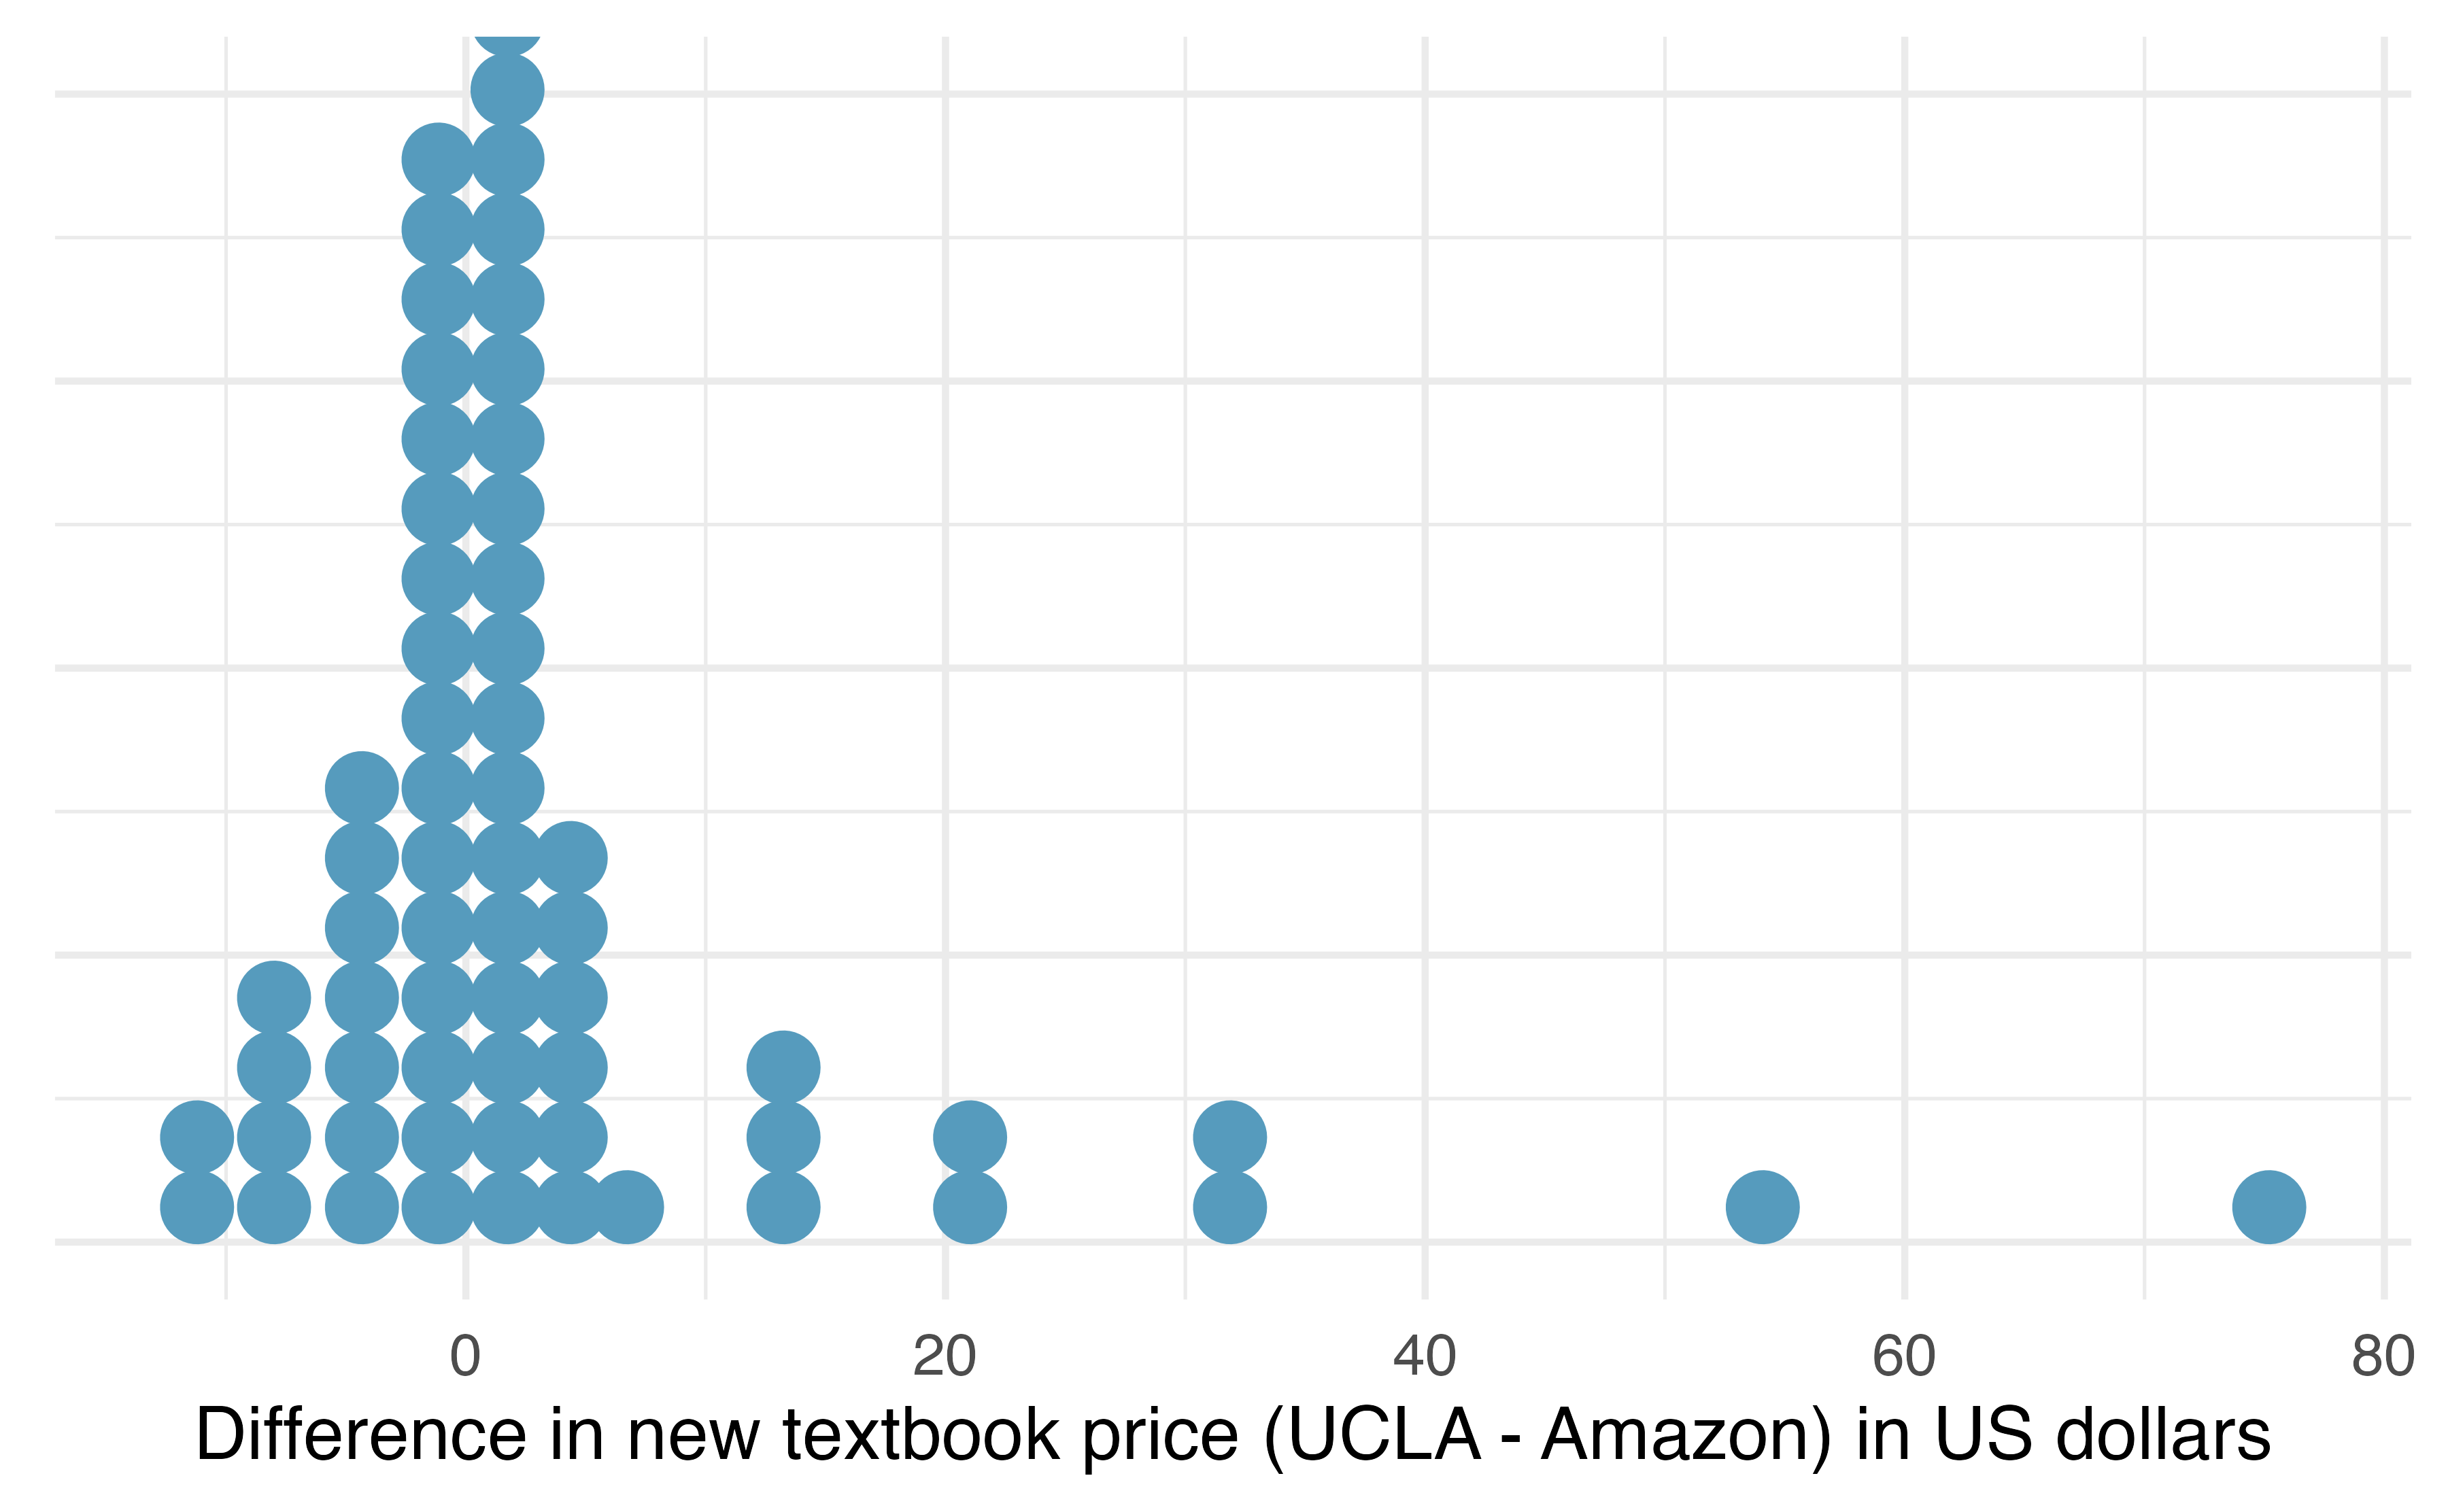 Distribution of differences in new textbook price (UCLA Bookstore -- Amazon) in US dollars for 68 required textbooks at UCLA.